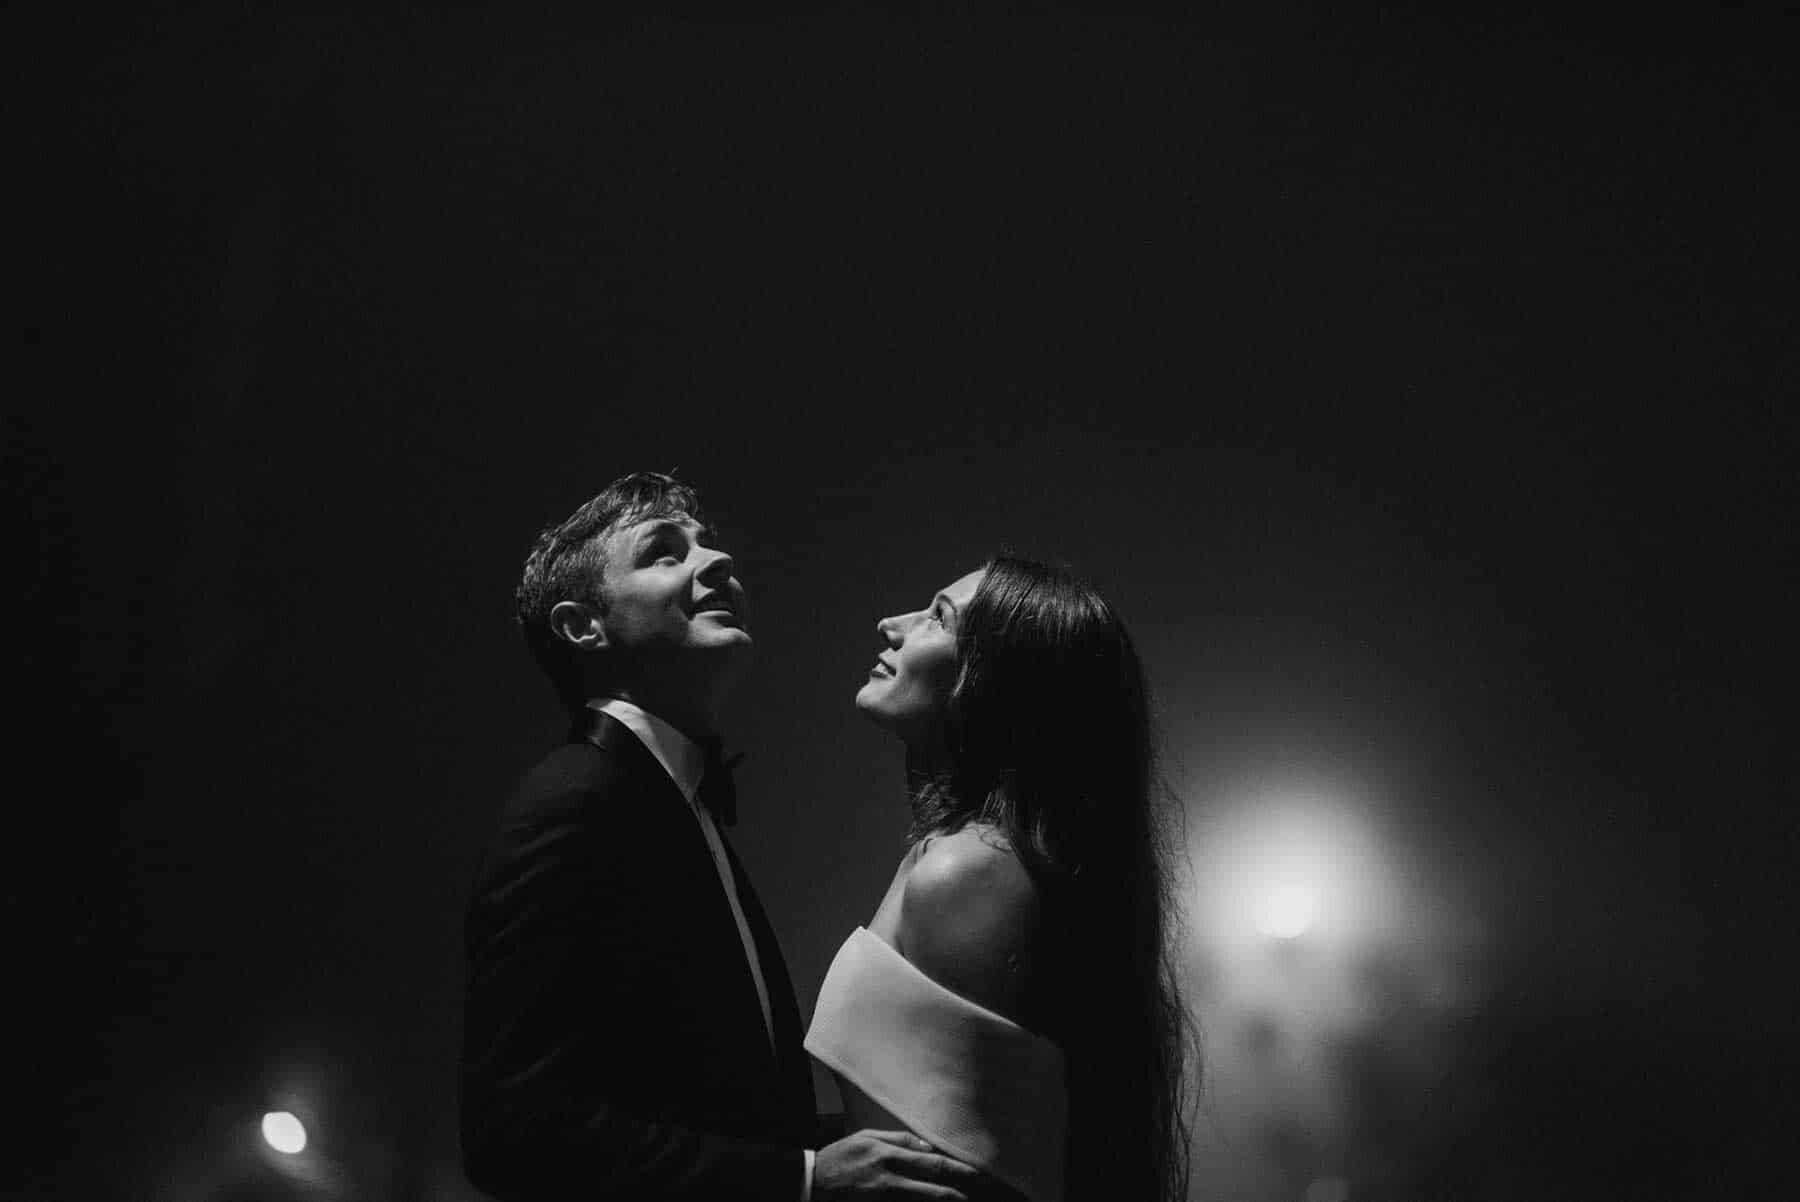 moody classic wedding, Toowoomba / photography by Damien Milan